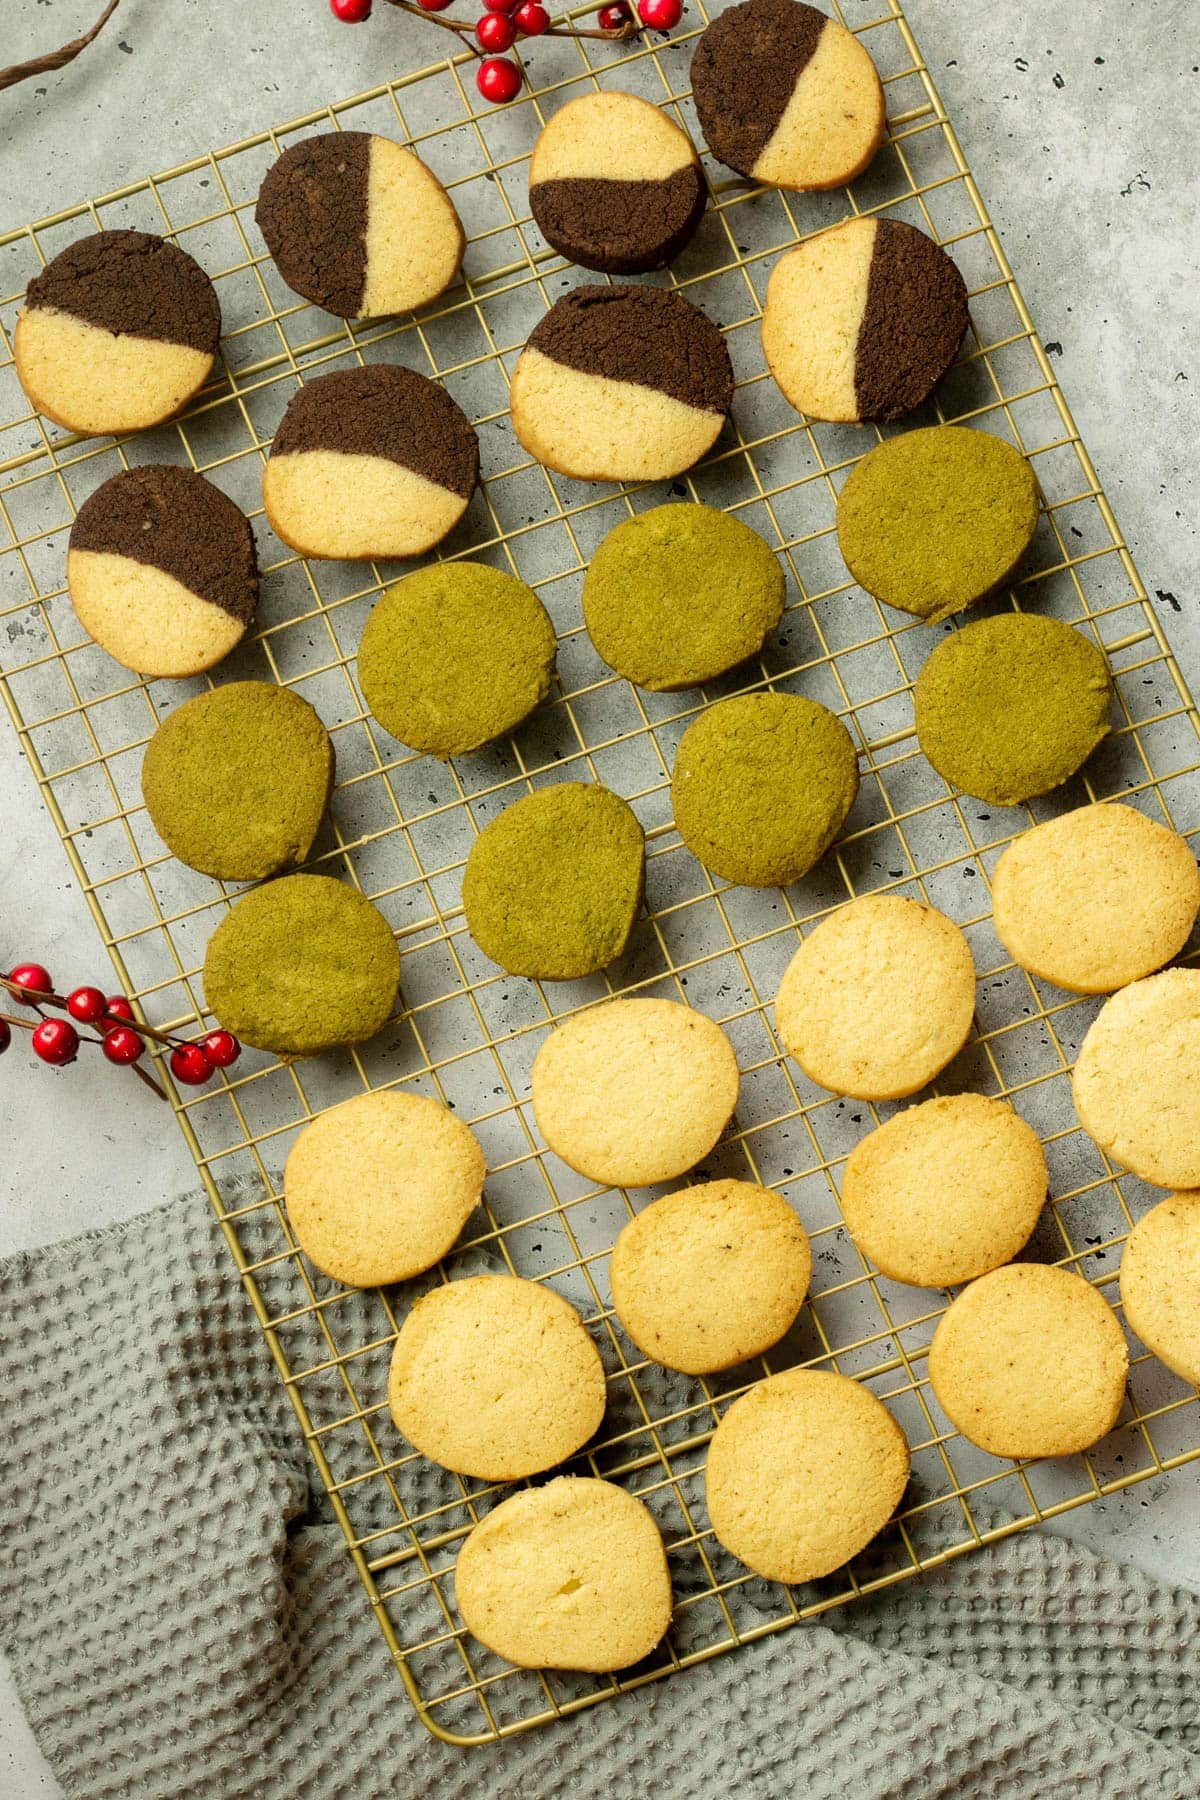 Three types of German Heidesand Cookies - Matcha, Chocolate and Vanilla, as well as classic on a cooling rack.